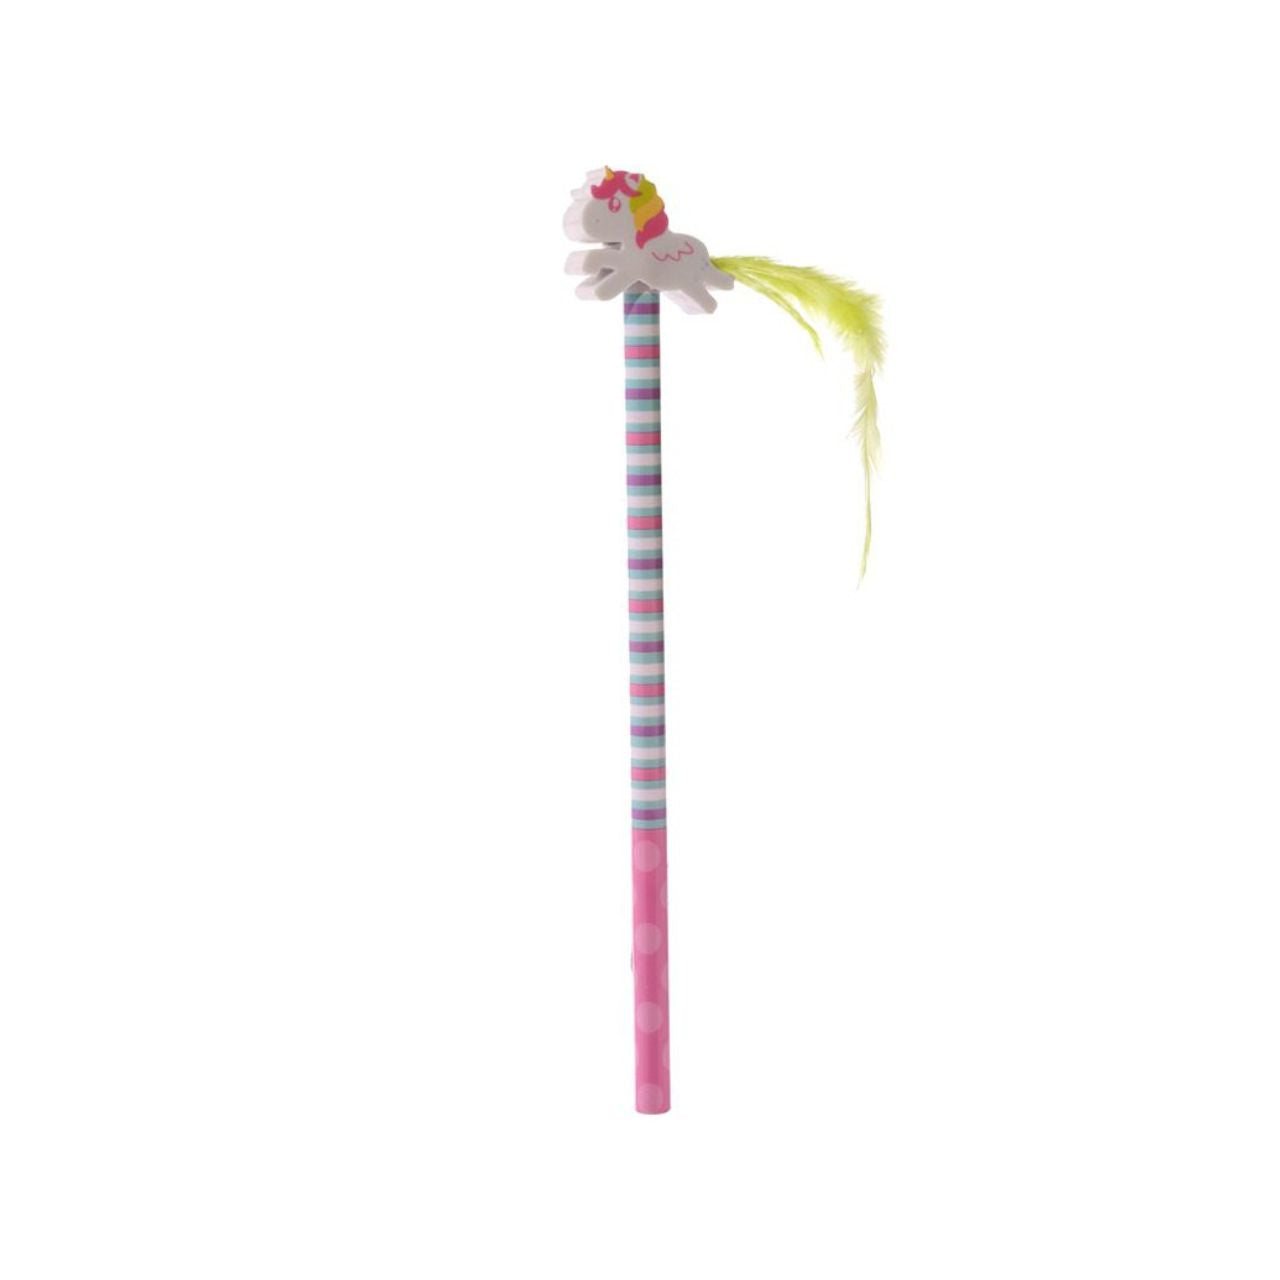 Add a touch of whimsy to your writing with our Unicorn Pencil &amp; Eraser Topper. Made for both kids and adults, this topper adds fun and function to your pencils. The topper is designed as a beautifully detailed unicorn and the eraser is perfectly shaped for easy erasing. Experience the magic of writing with our Unicorn Pencil &amp; Eraser Topper.